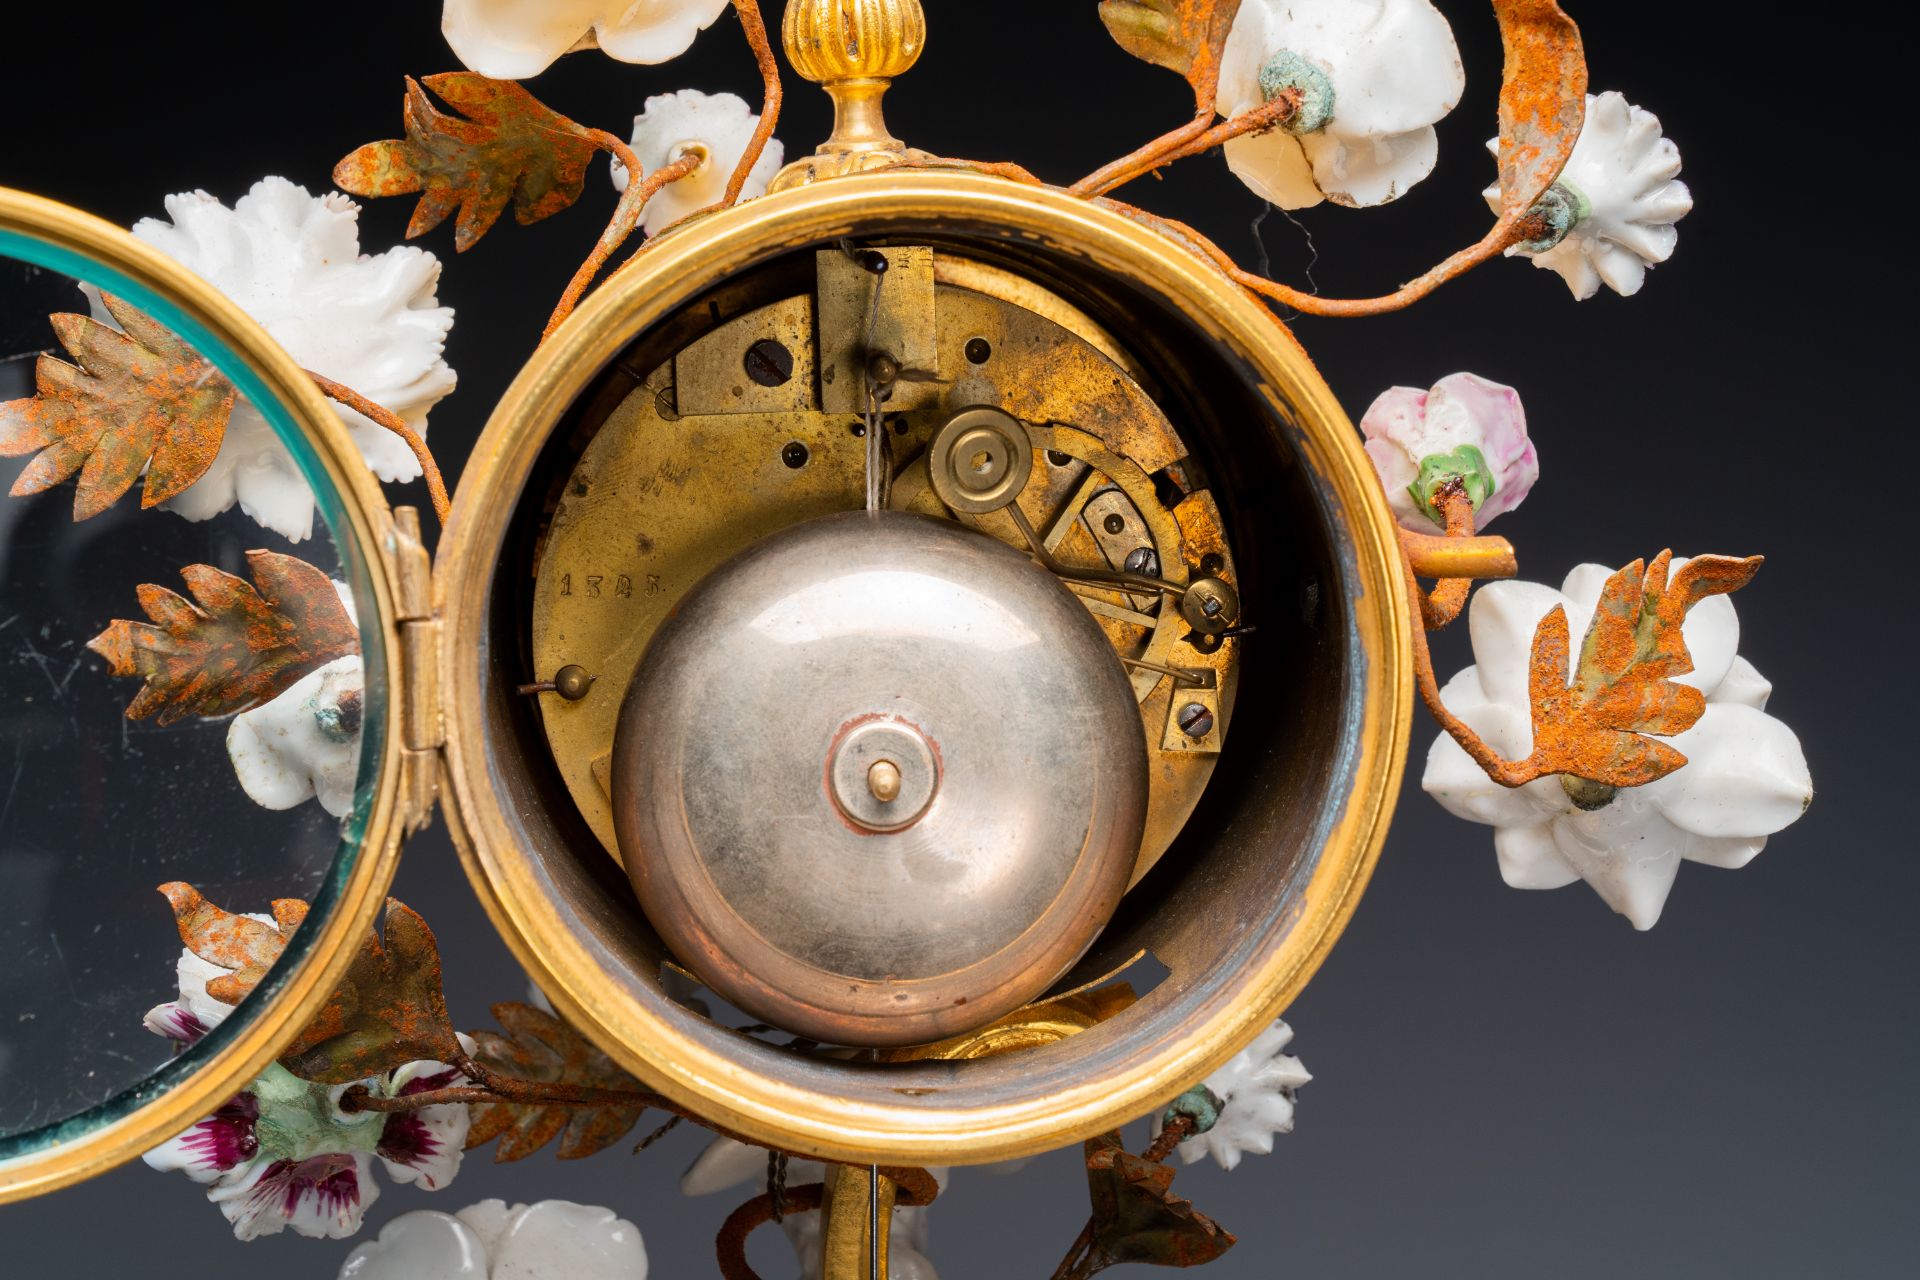 A French ormolu-mounted porcelain mantel clock, 18/19th C. - Image 15 of 28